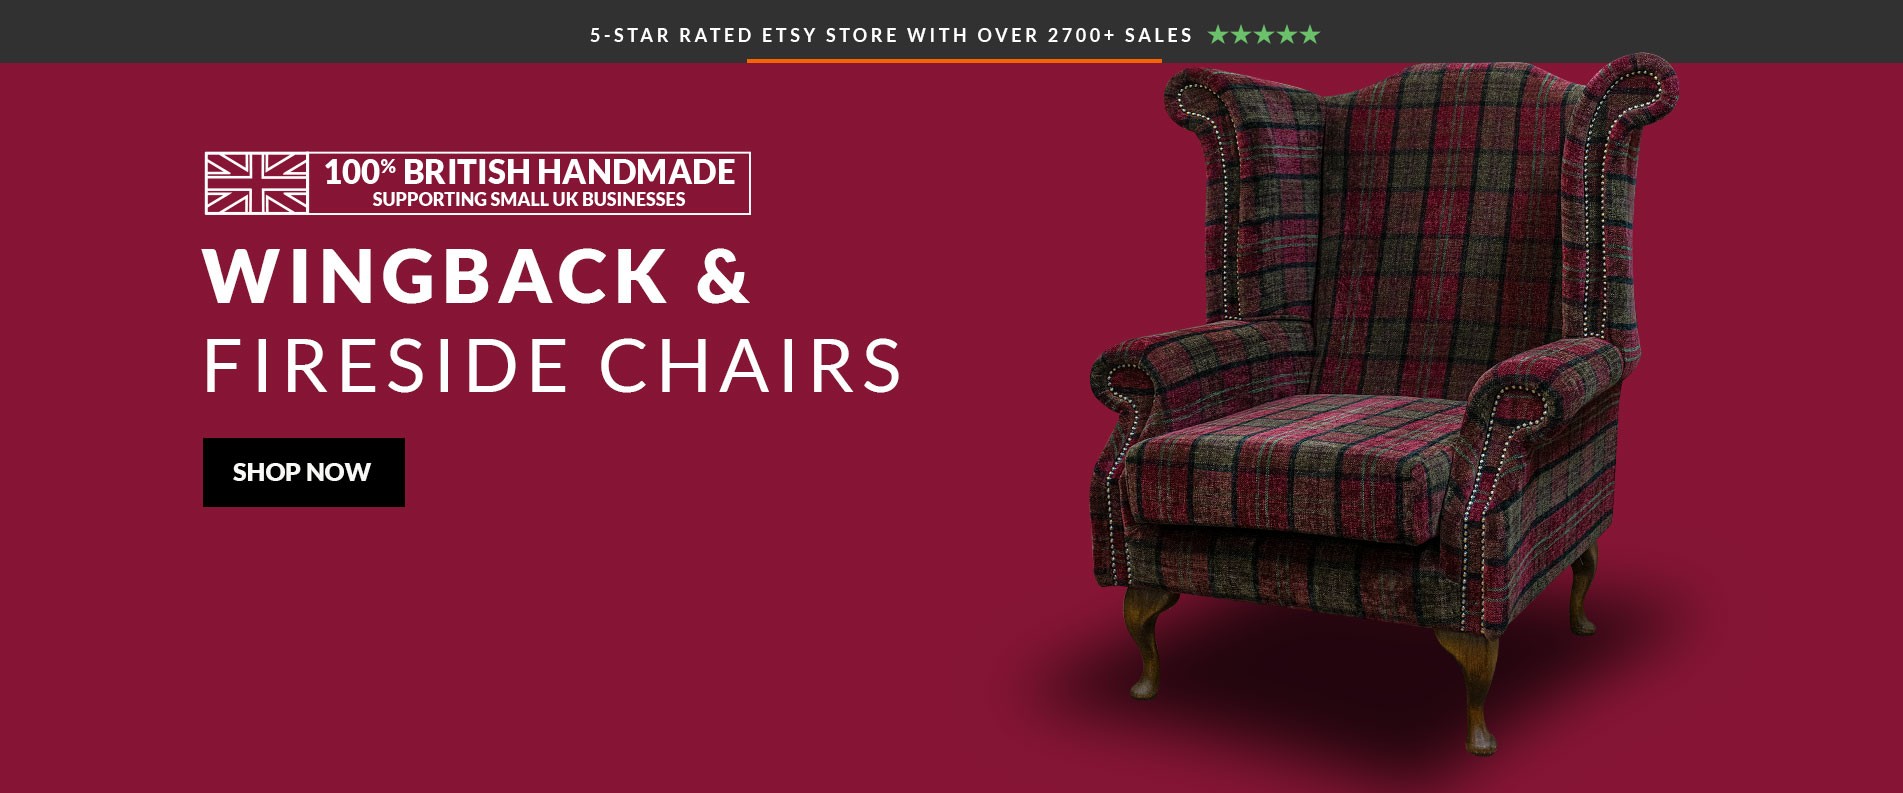 Wingback & Fireside Chairs